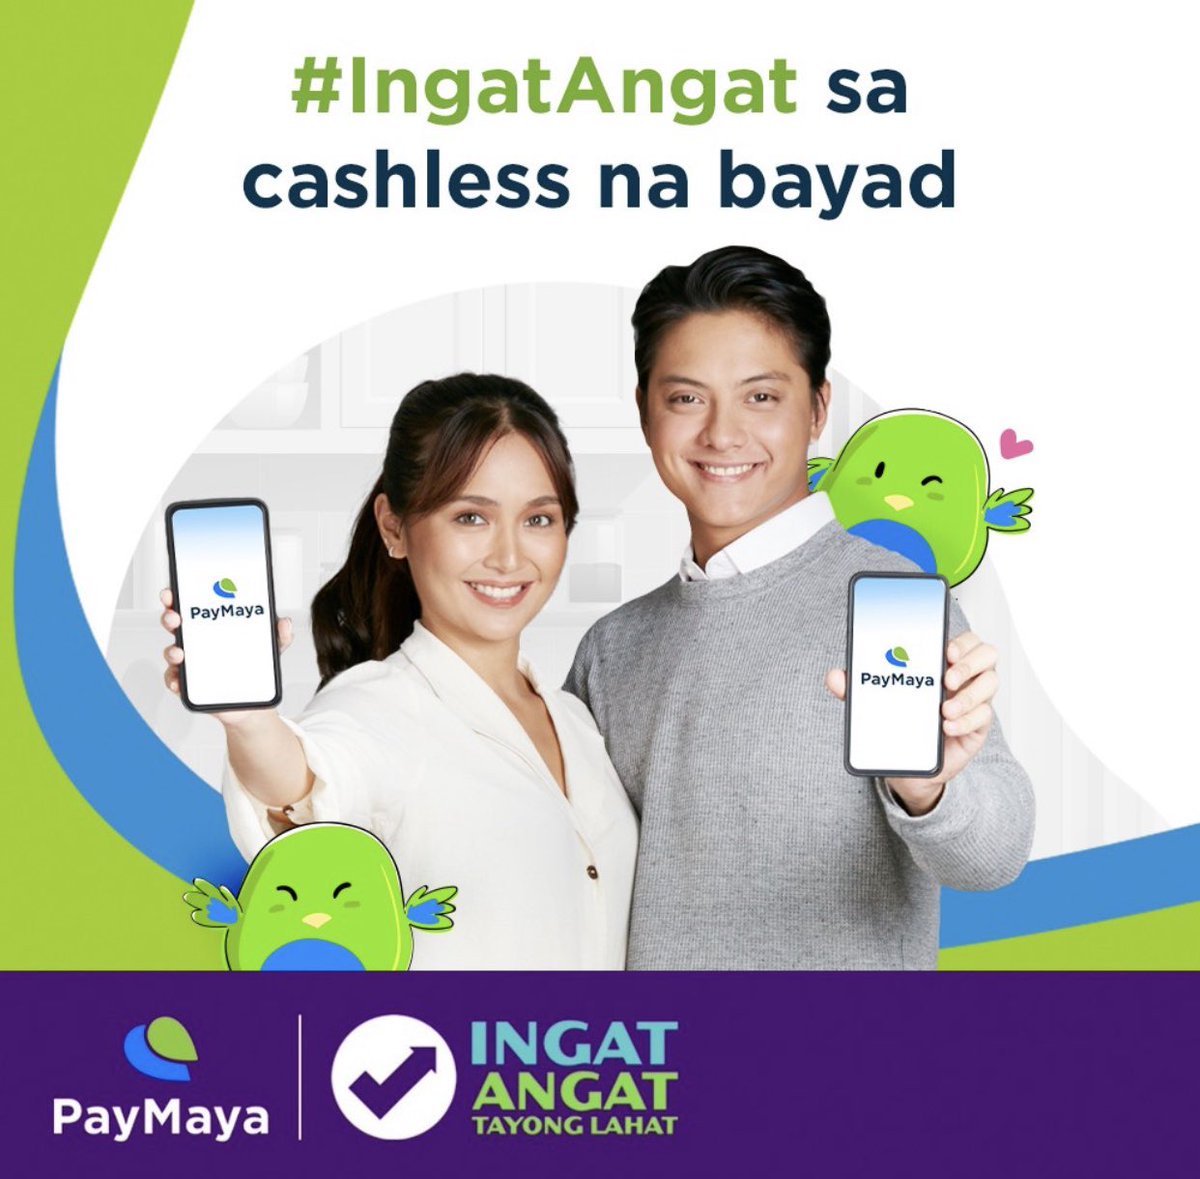 Tuloy ang pag-iingat, tuloy ang pag-angat! With PayMaya, we can practice extra safety measures by doing cashless and contactless payment transactions. Always choose what keeps yourself and your loved ones safe! 💚 #IngatAngat @PayMayaOfficial